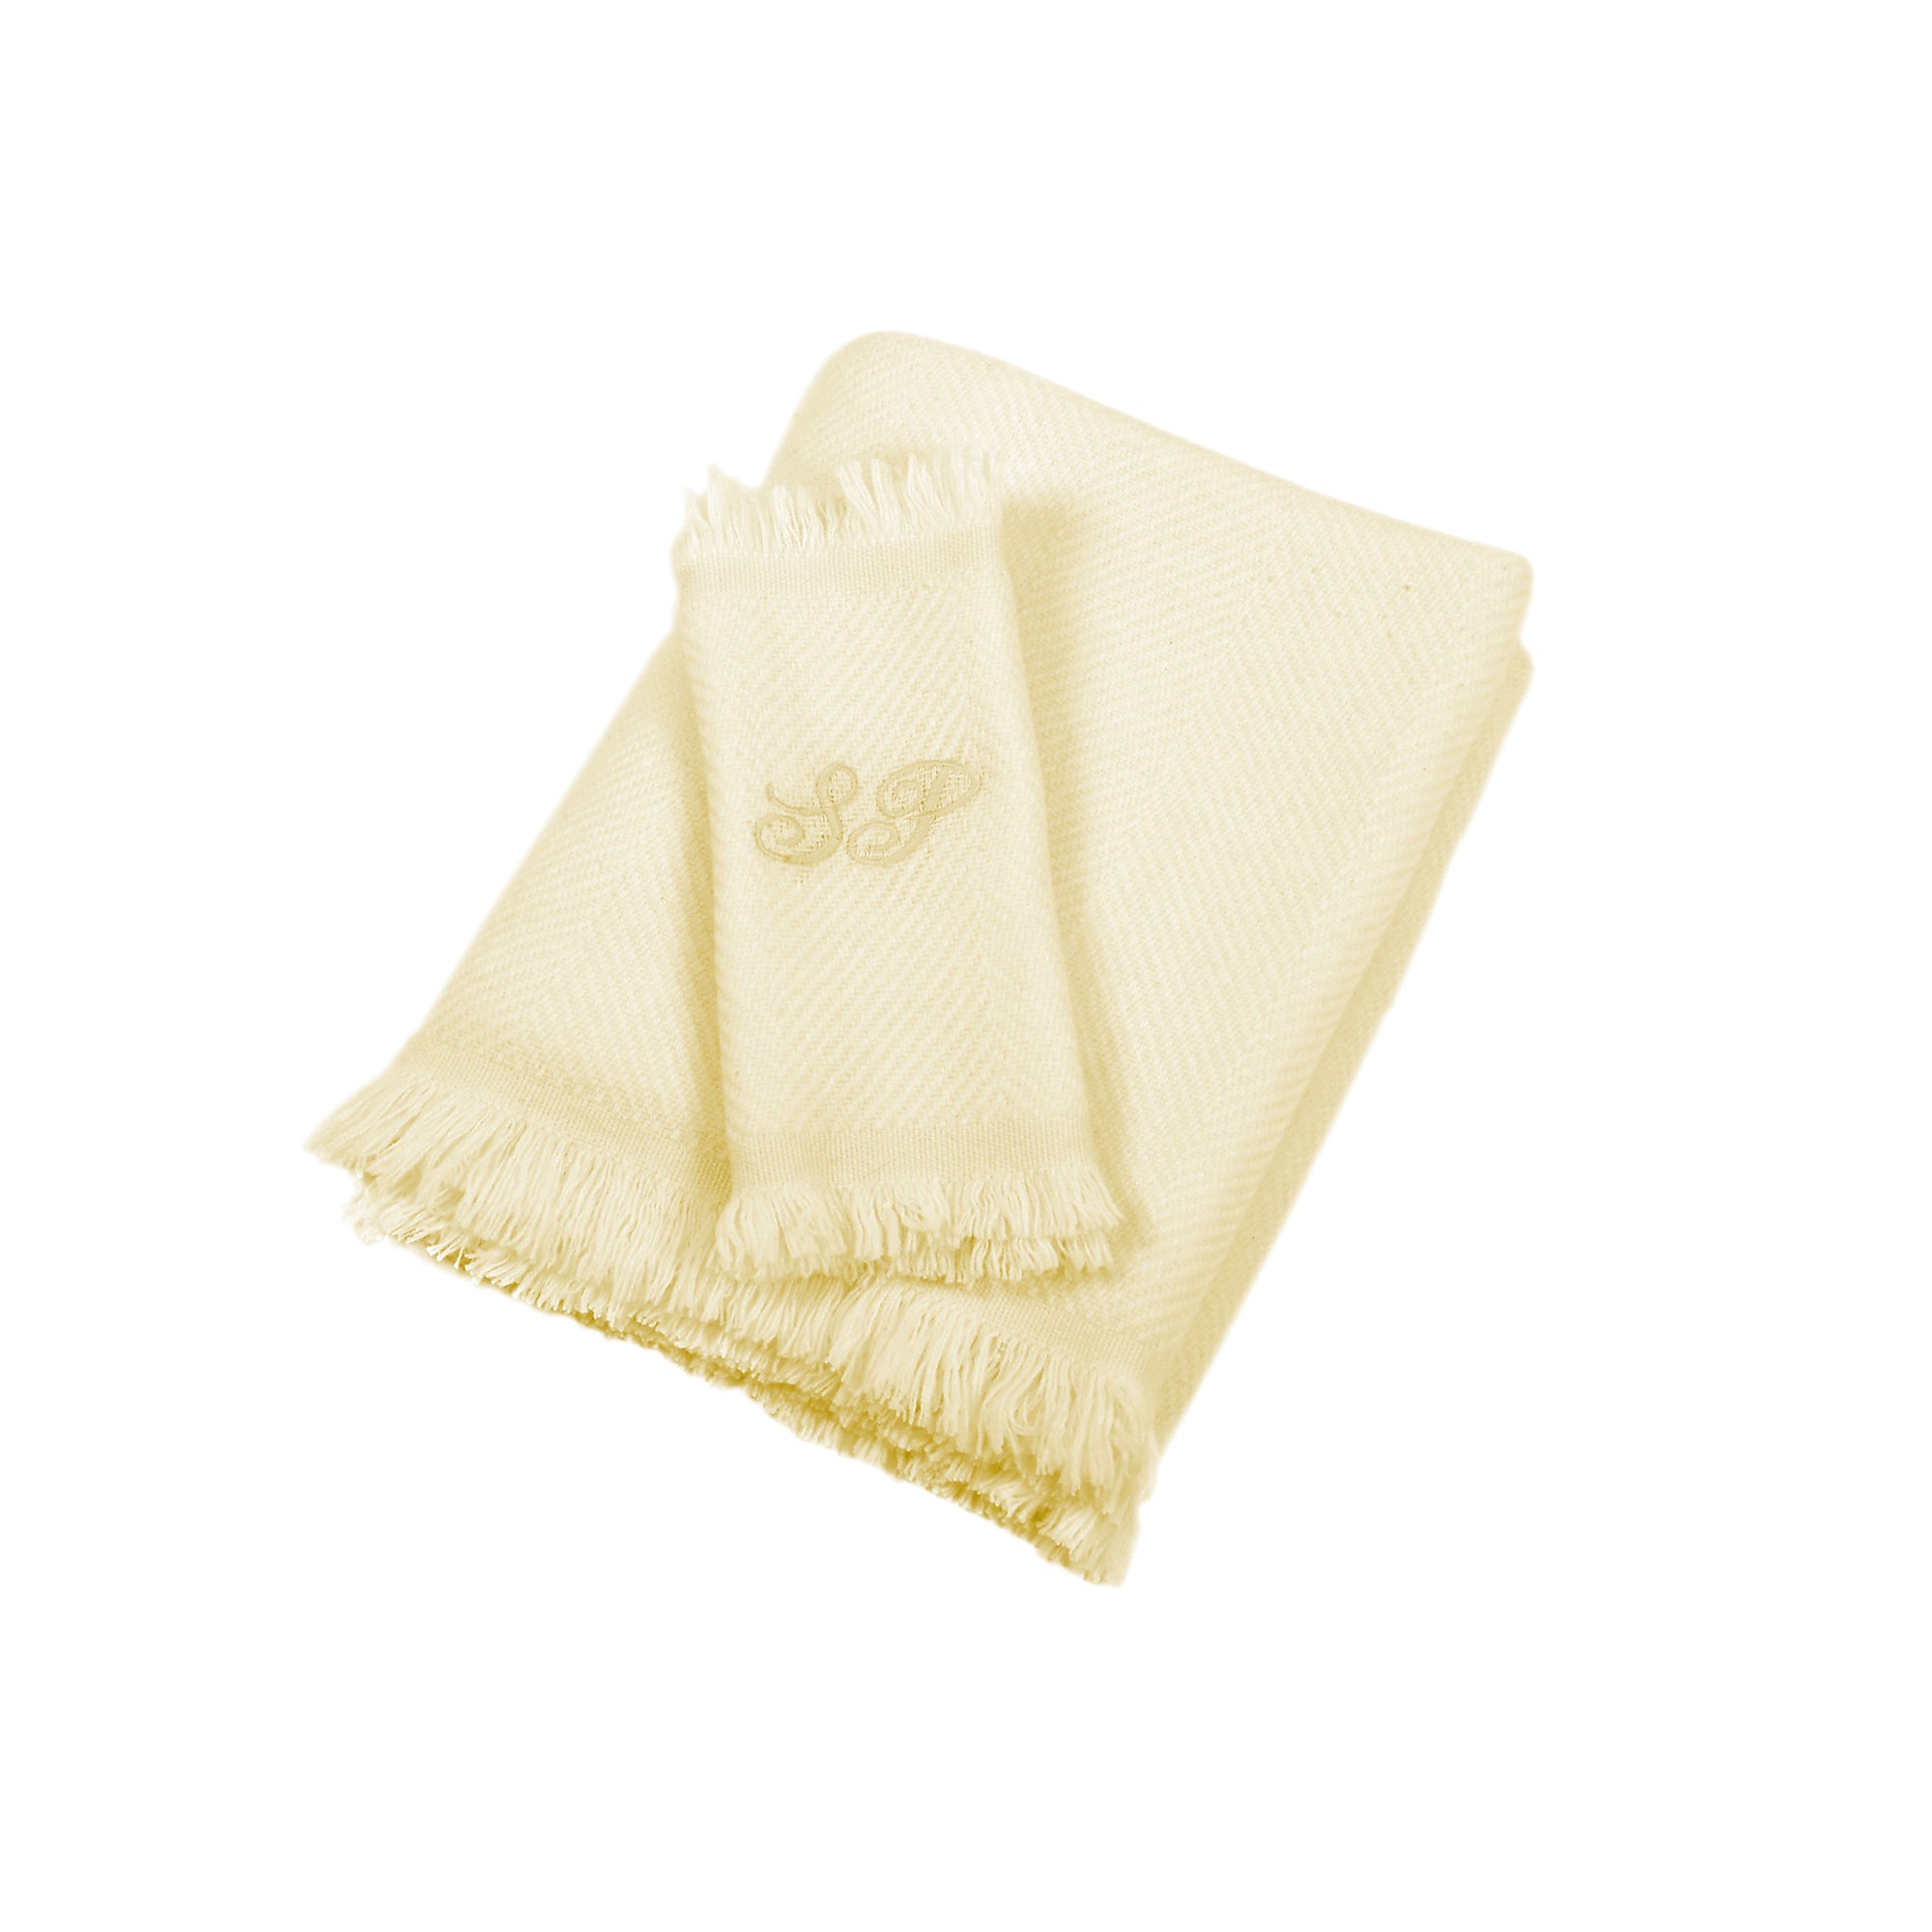 Cream and Lemon Yellow 100% Cashmere Baby Blanket with short fringes - Alternative view 2